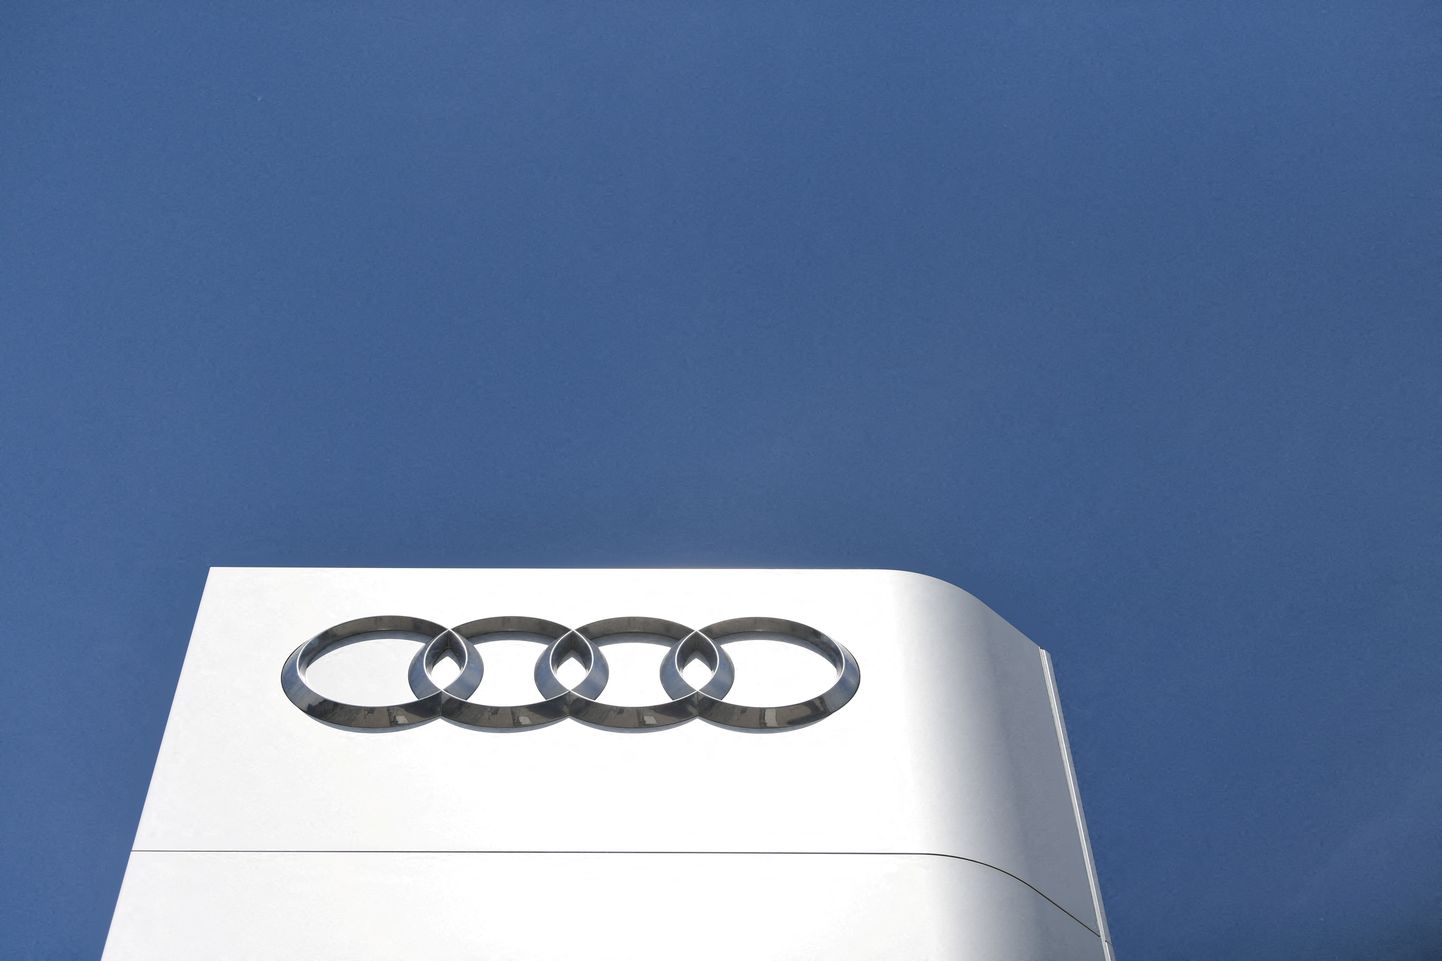 FILE PHOTO: The company logo is seen at the headquarters of the German car manufacturer Audi in Ingolstadt, Germany, June 3, 2020. REUTERS/Andreas Gebert/File Photo